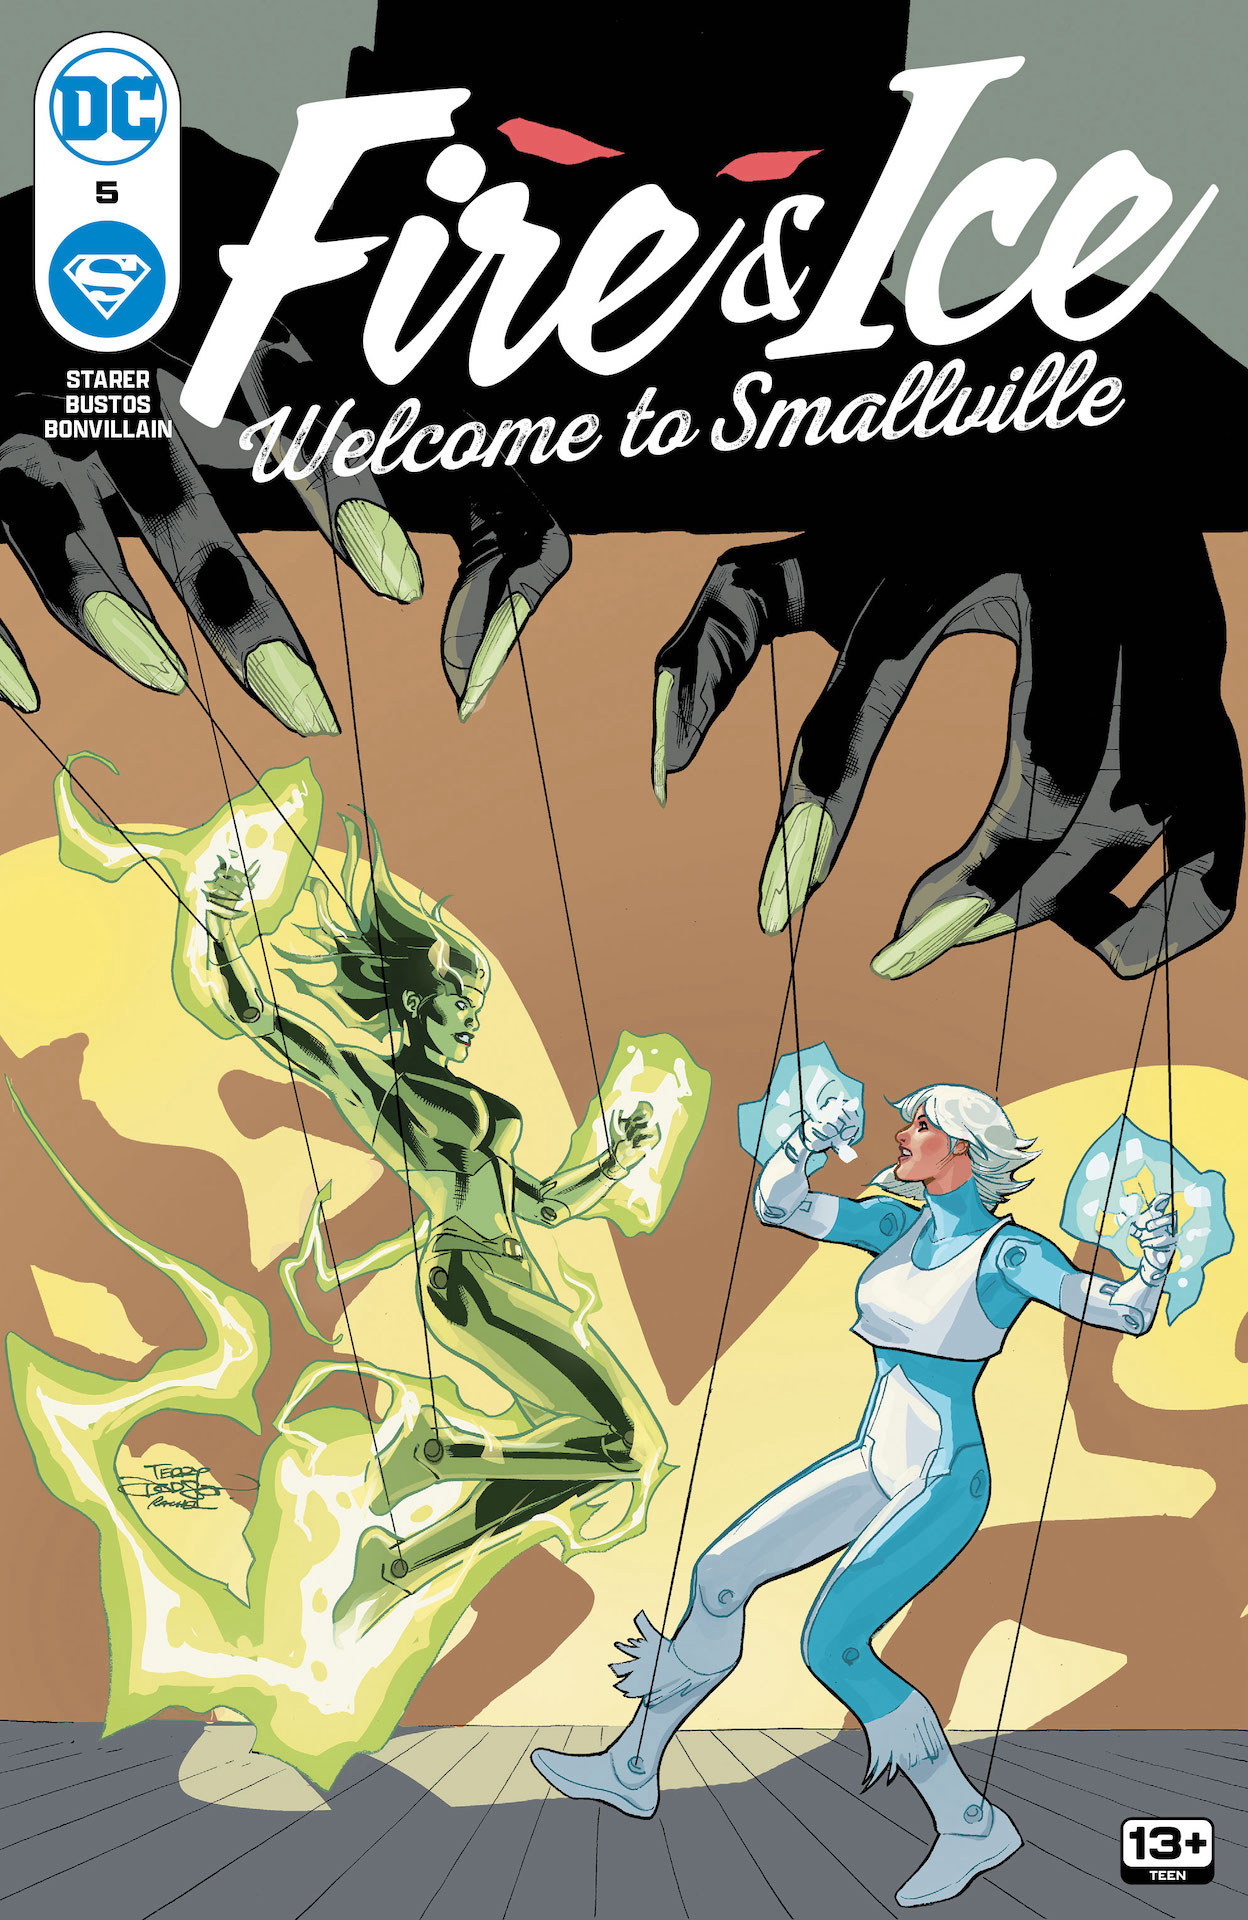 DC Preview: Fire & Ice: Welcome to Smallville #5